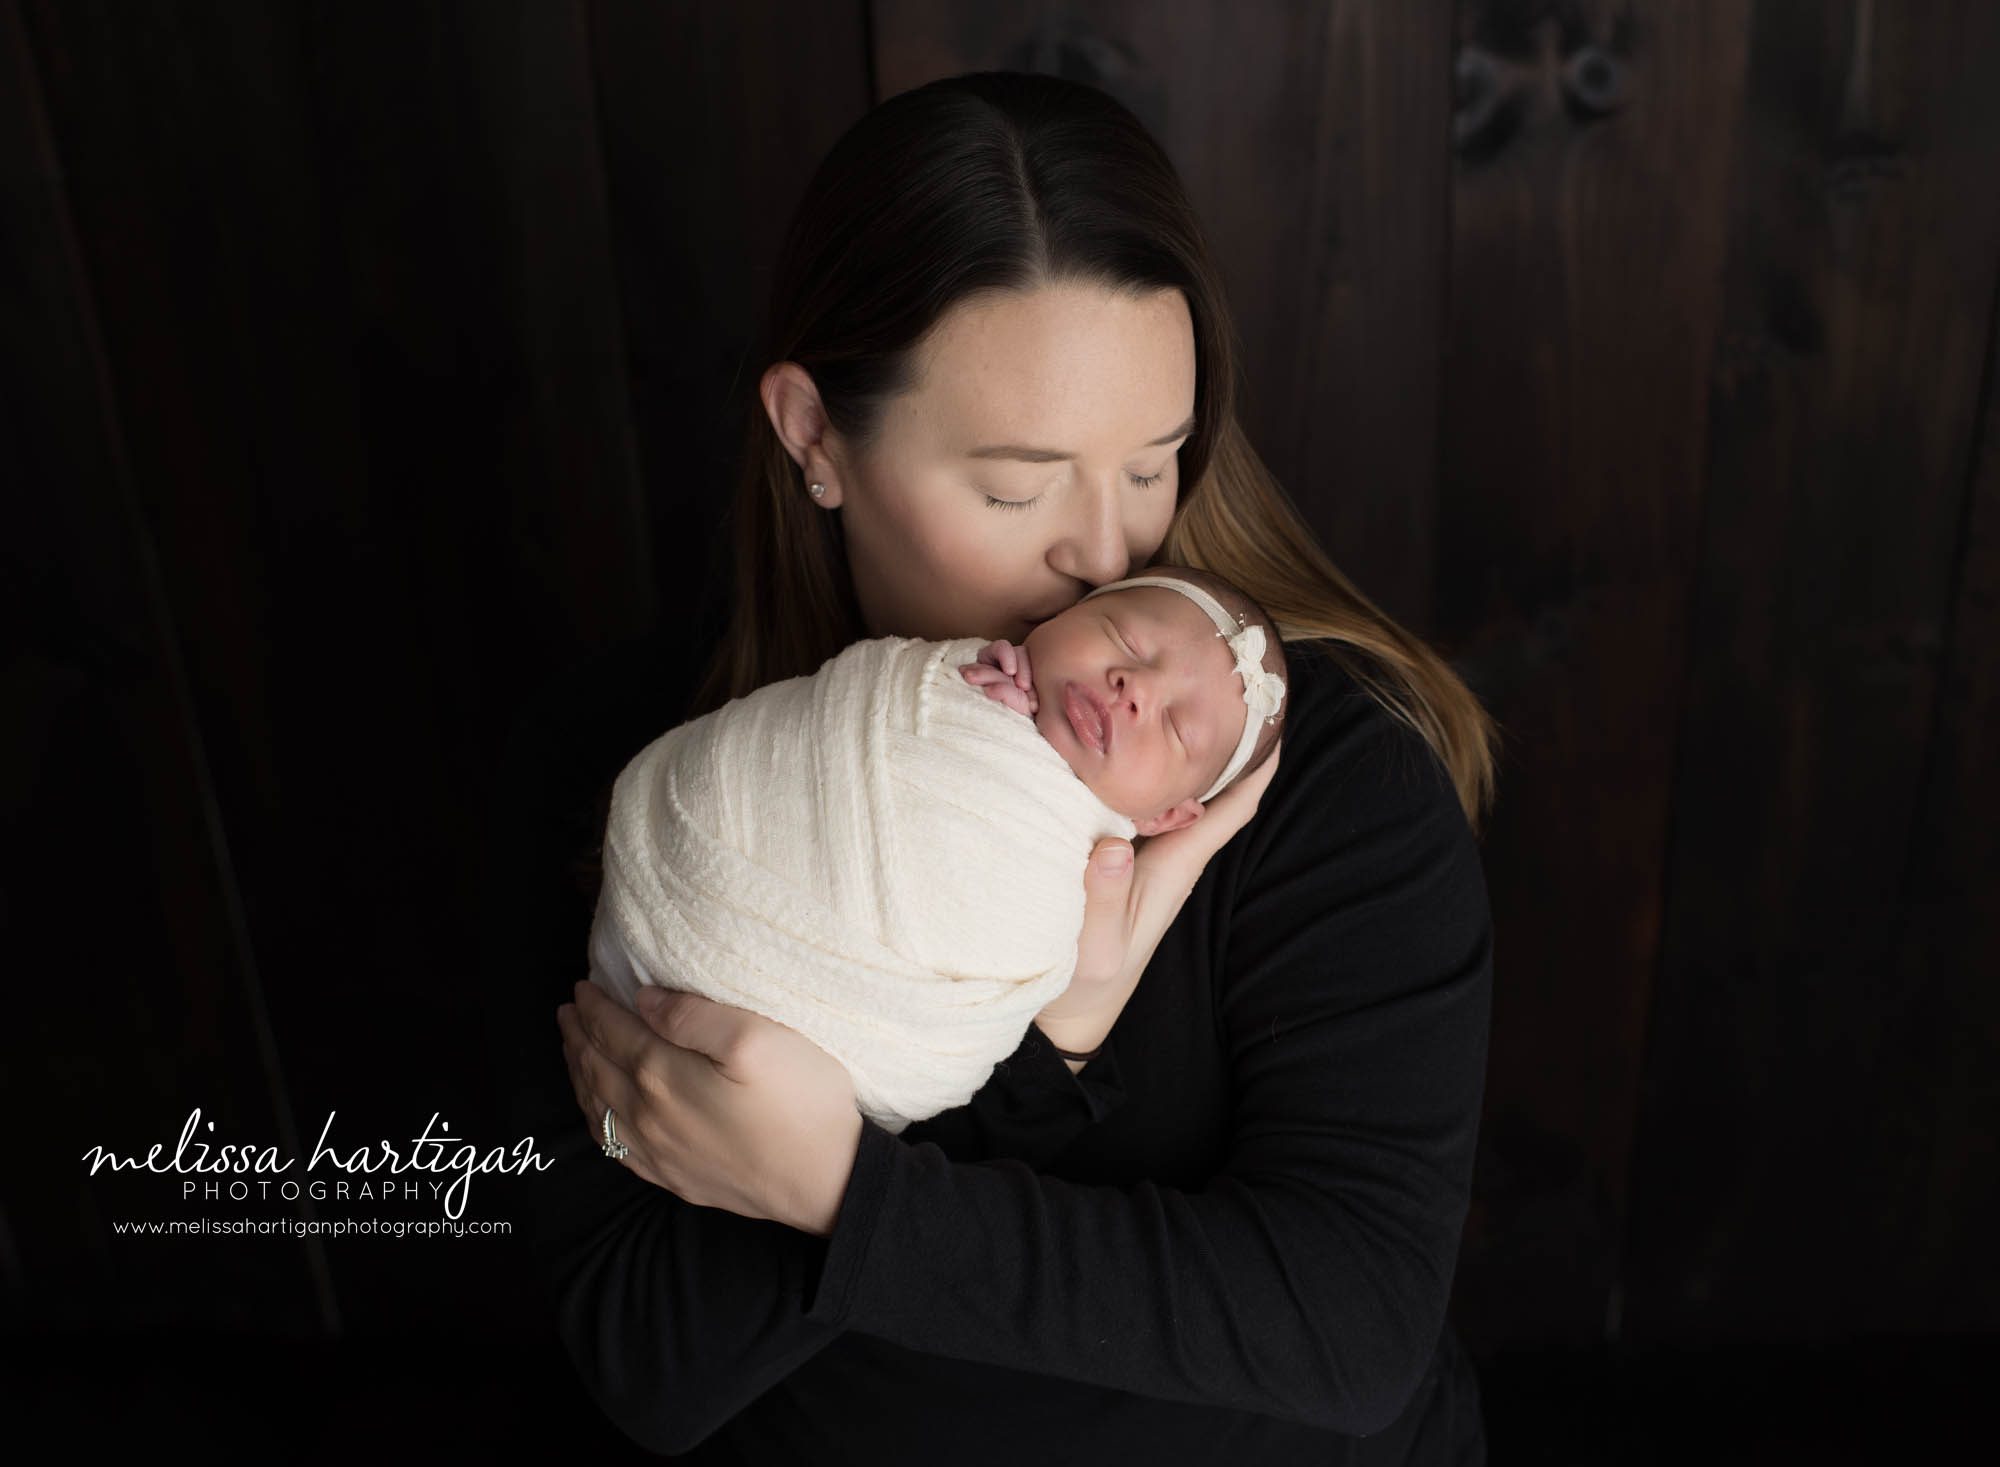 mom osed with newborn baby girl holding her close giving her baby a kiss moms love